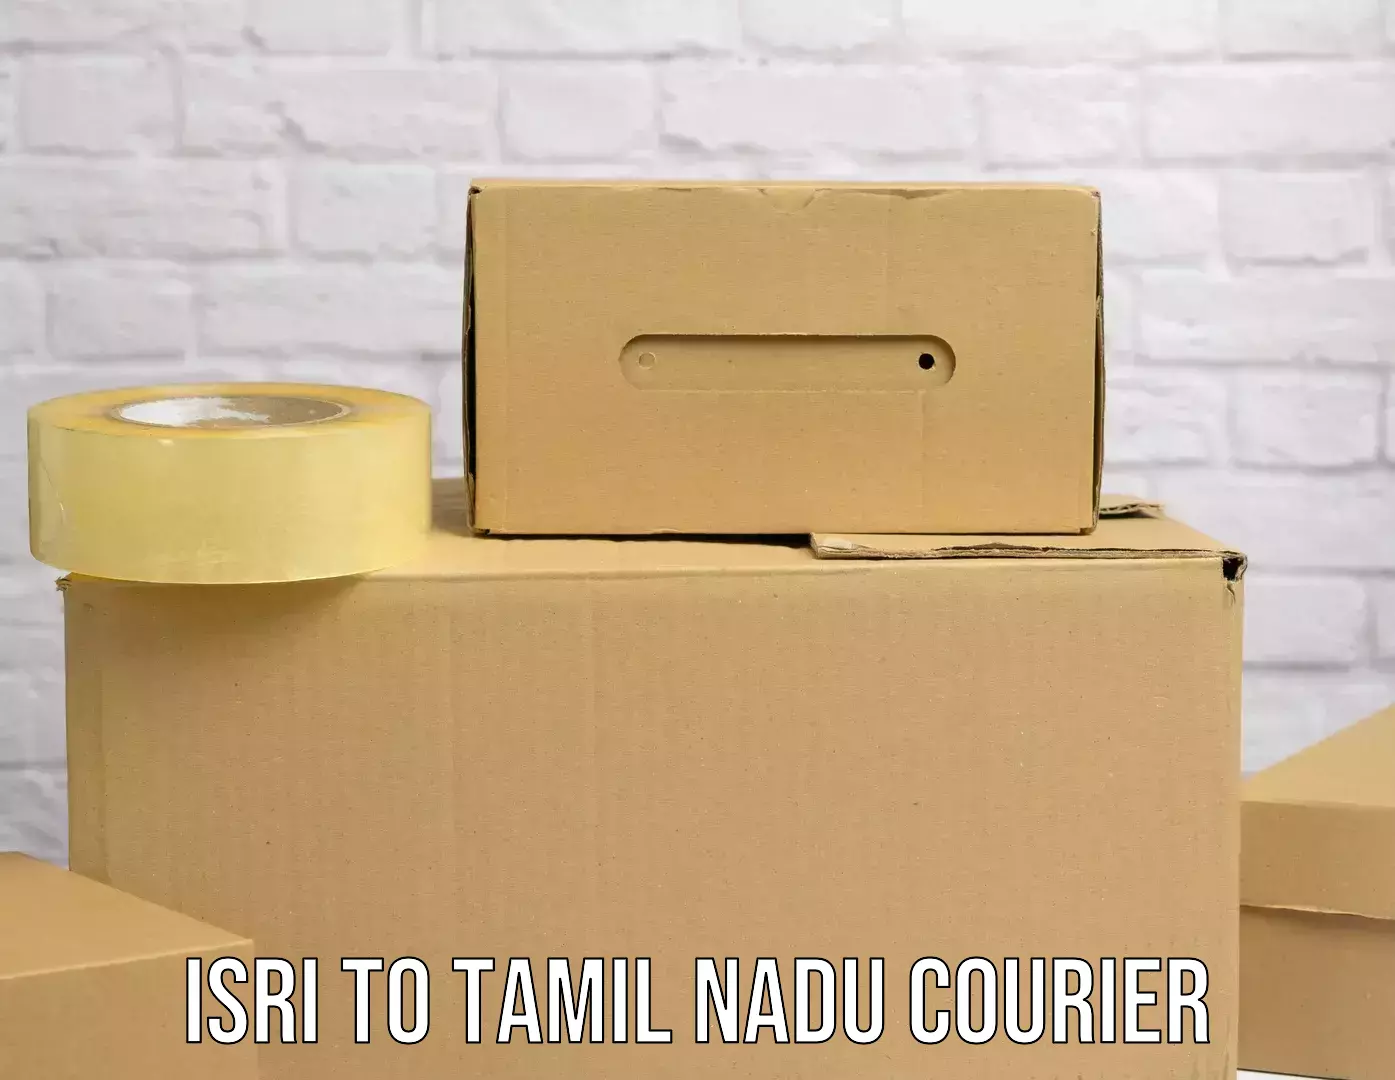 Multi-service courier options Isri to Tamil Nadu